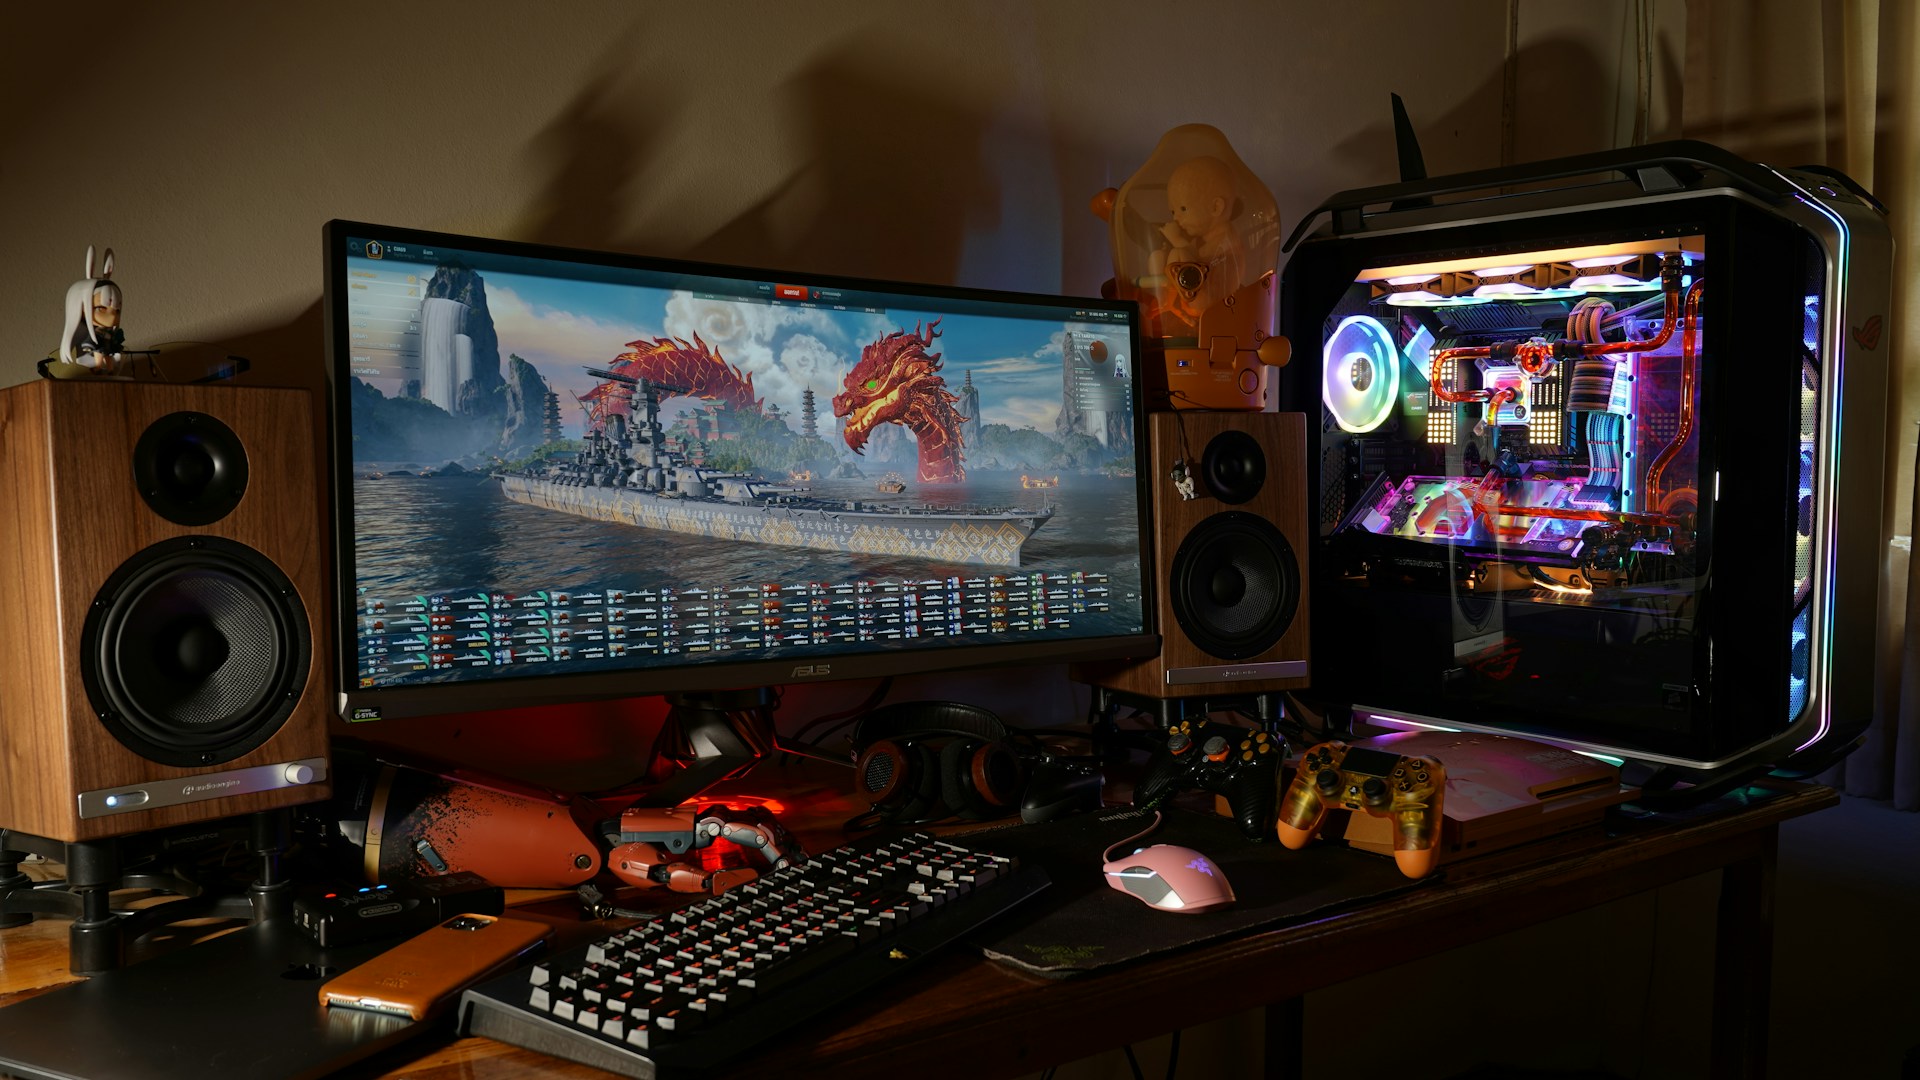 The Best 27 Inch 1440p Monitors: Our Top Charts